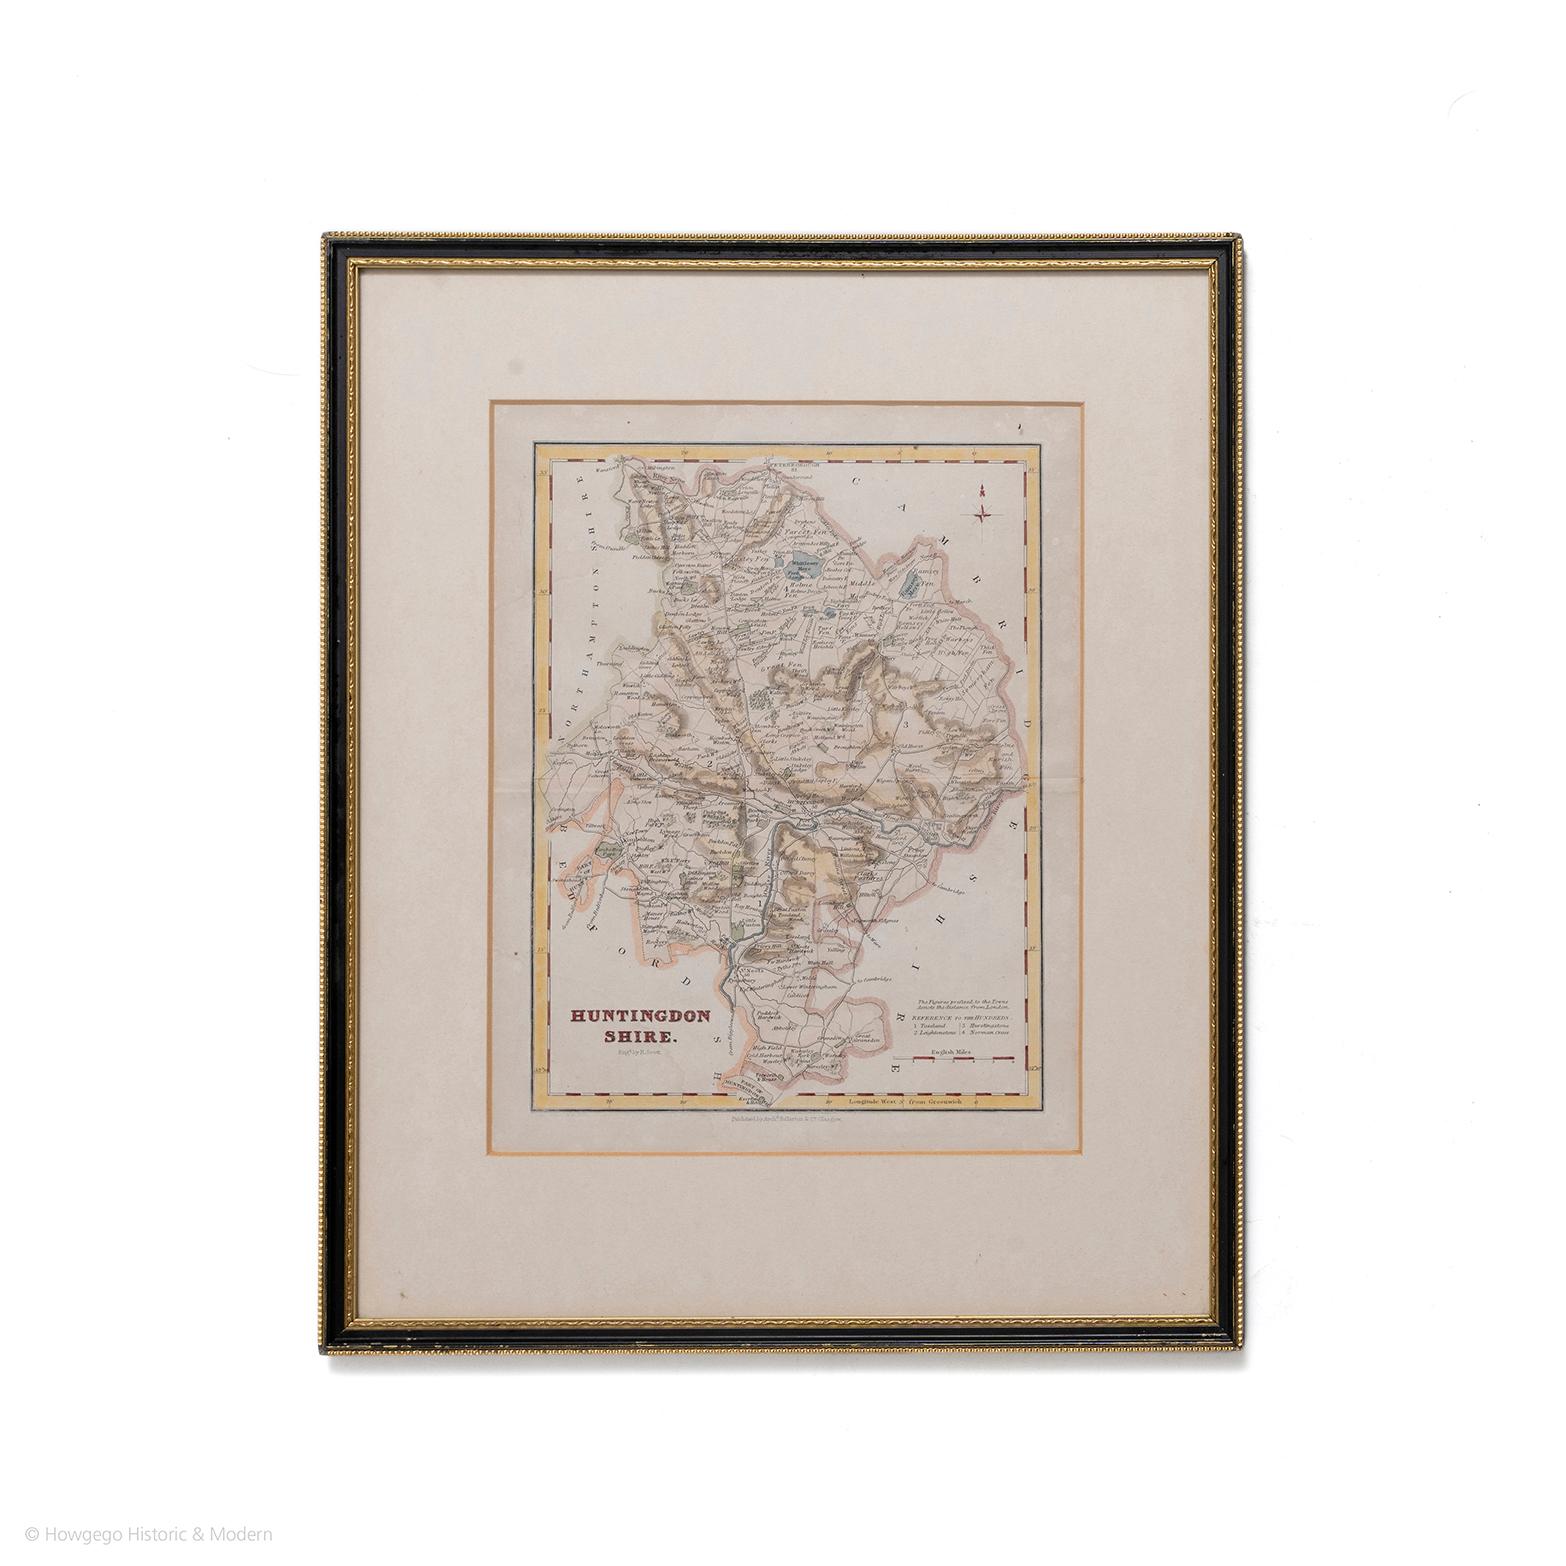 Folding Map of Huntingdonshire by R Scott with distances from London and reference to the hundreds.
Published by Archibald Fullarton & Co Glasgow. Measure: 40cm 16